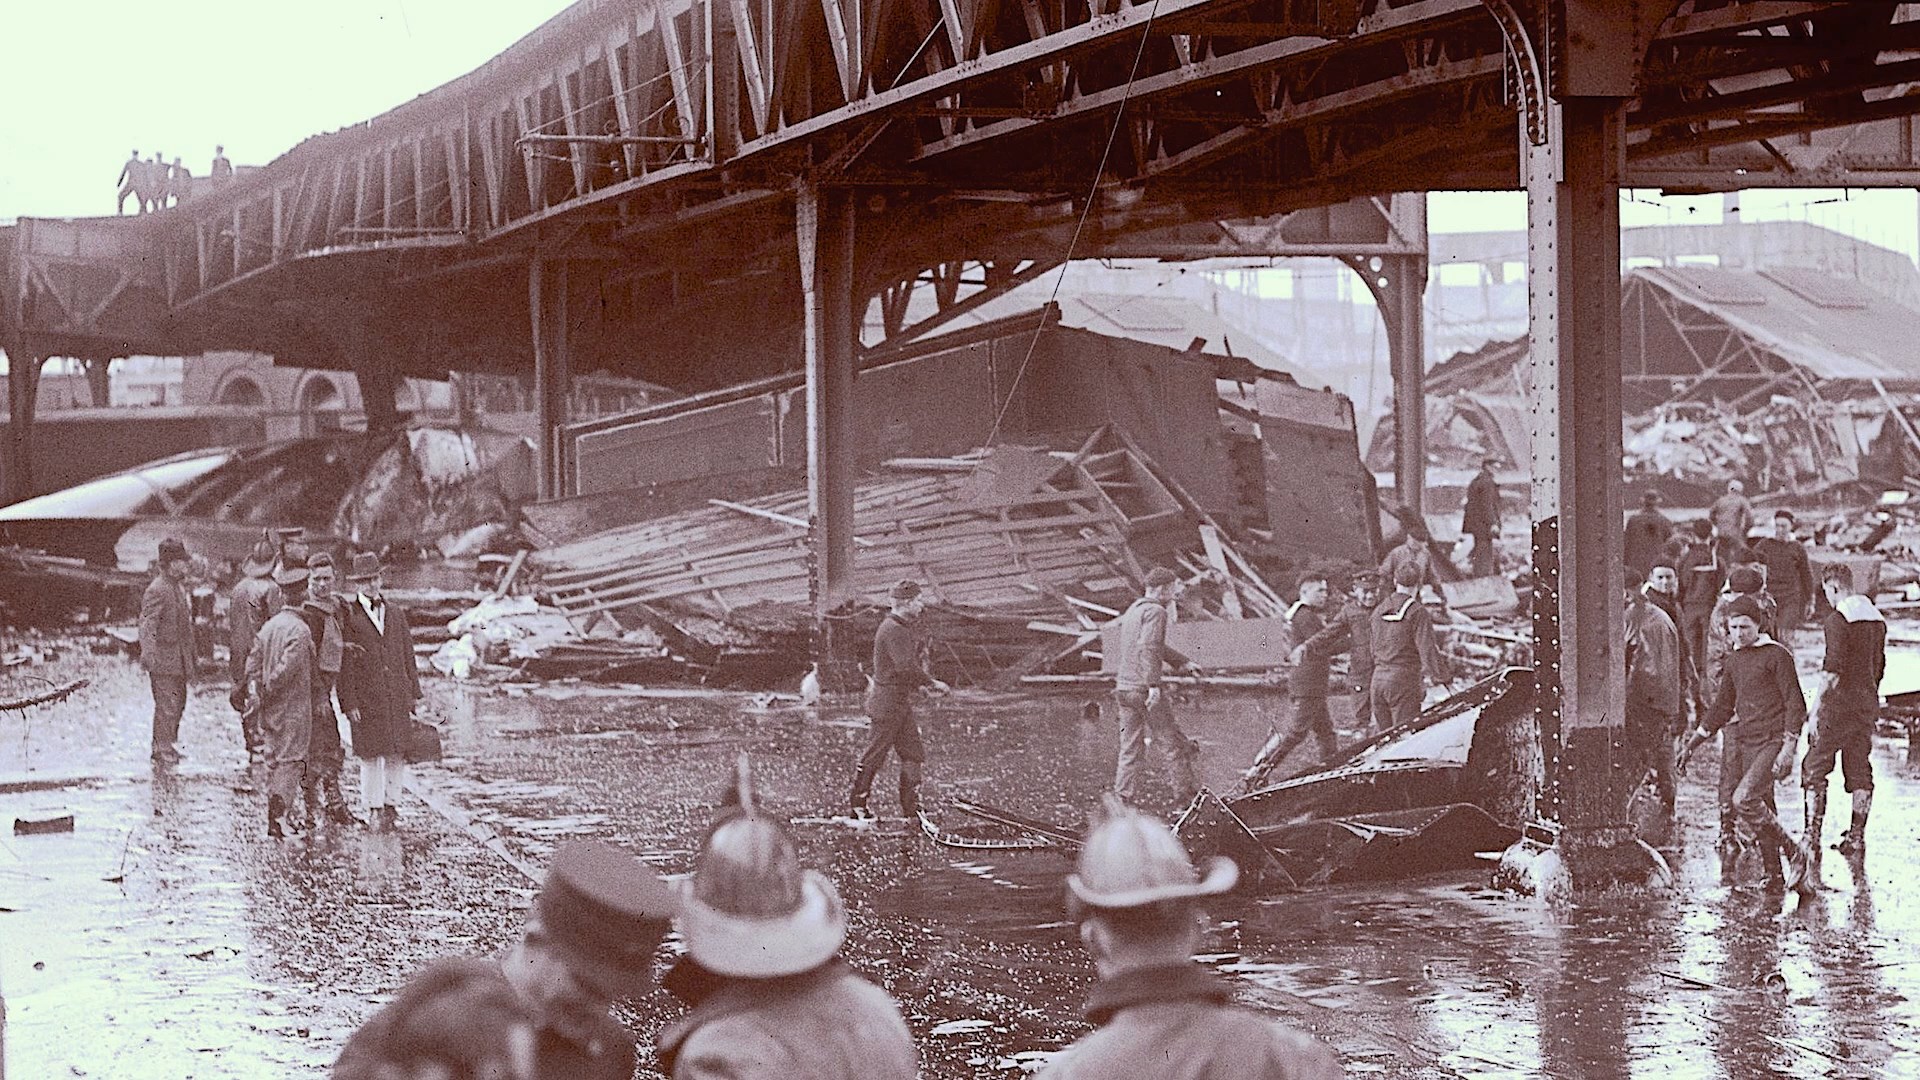 Old photograph of the aftermath of the molasses disaster